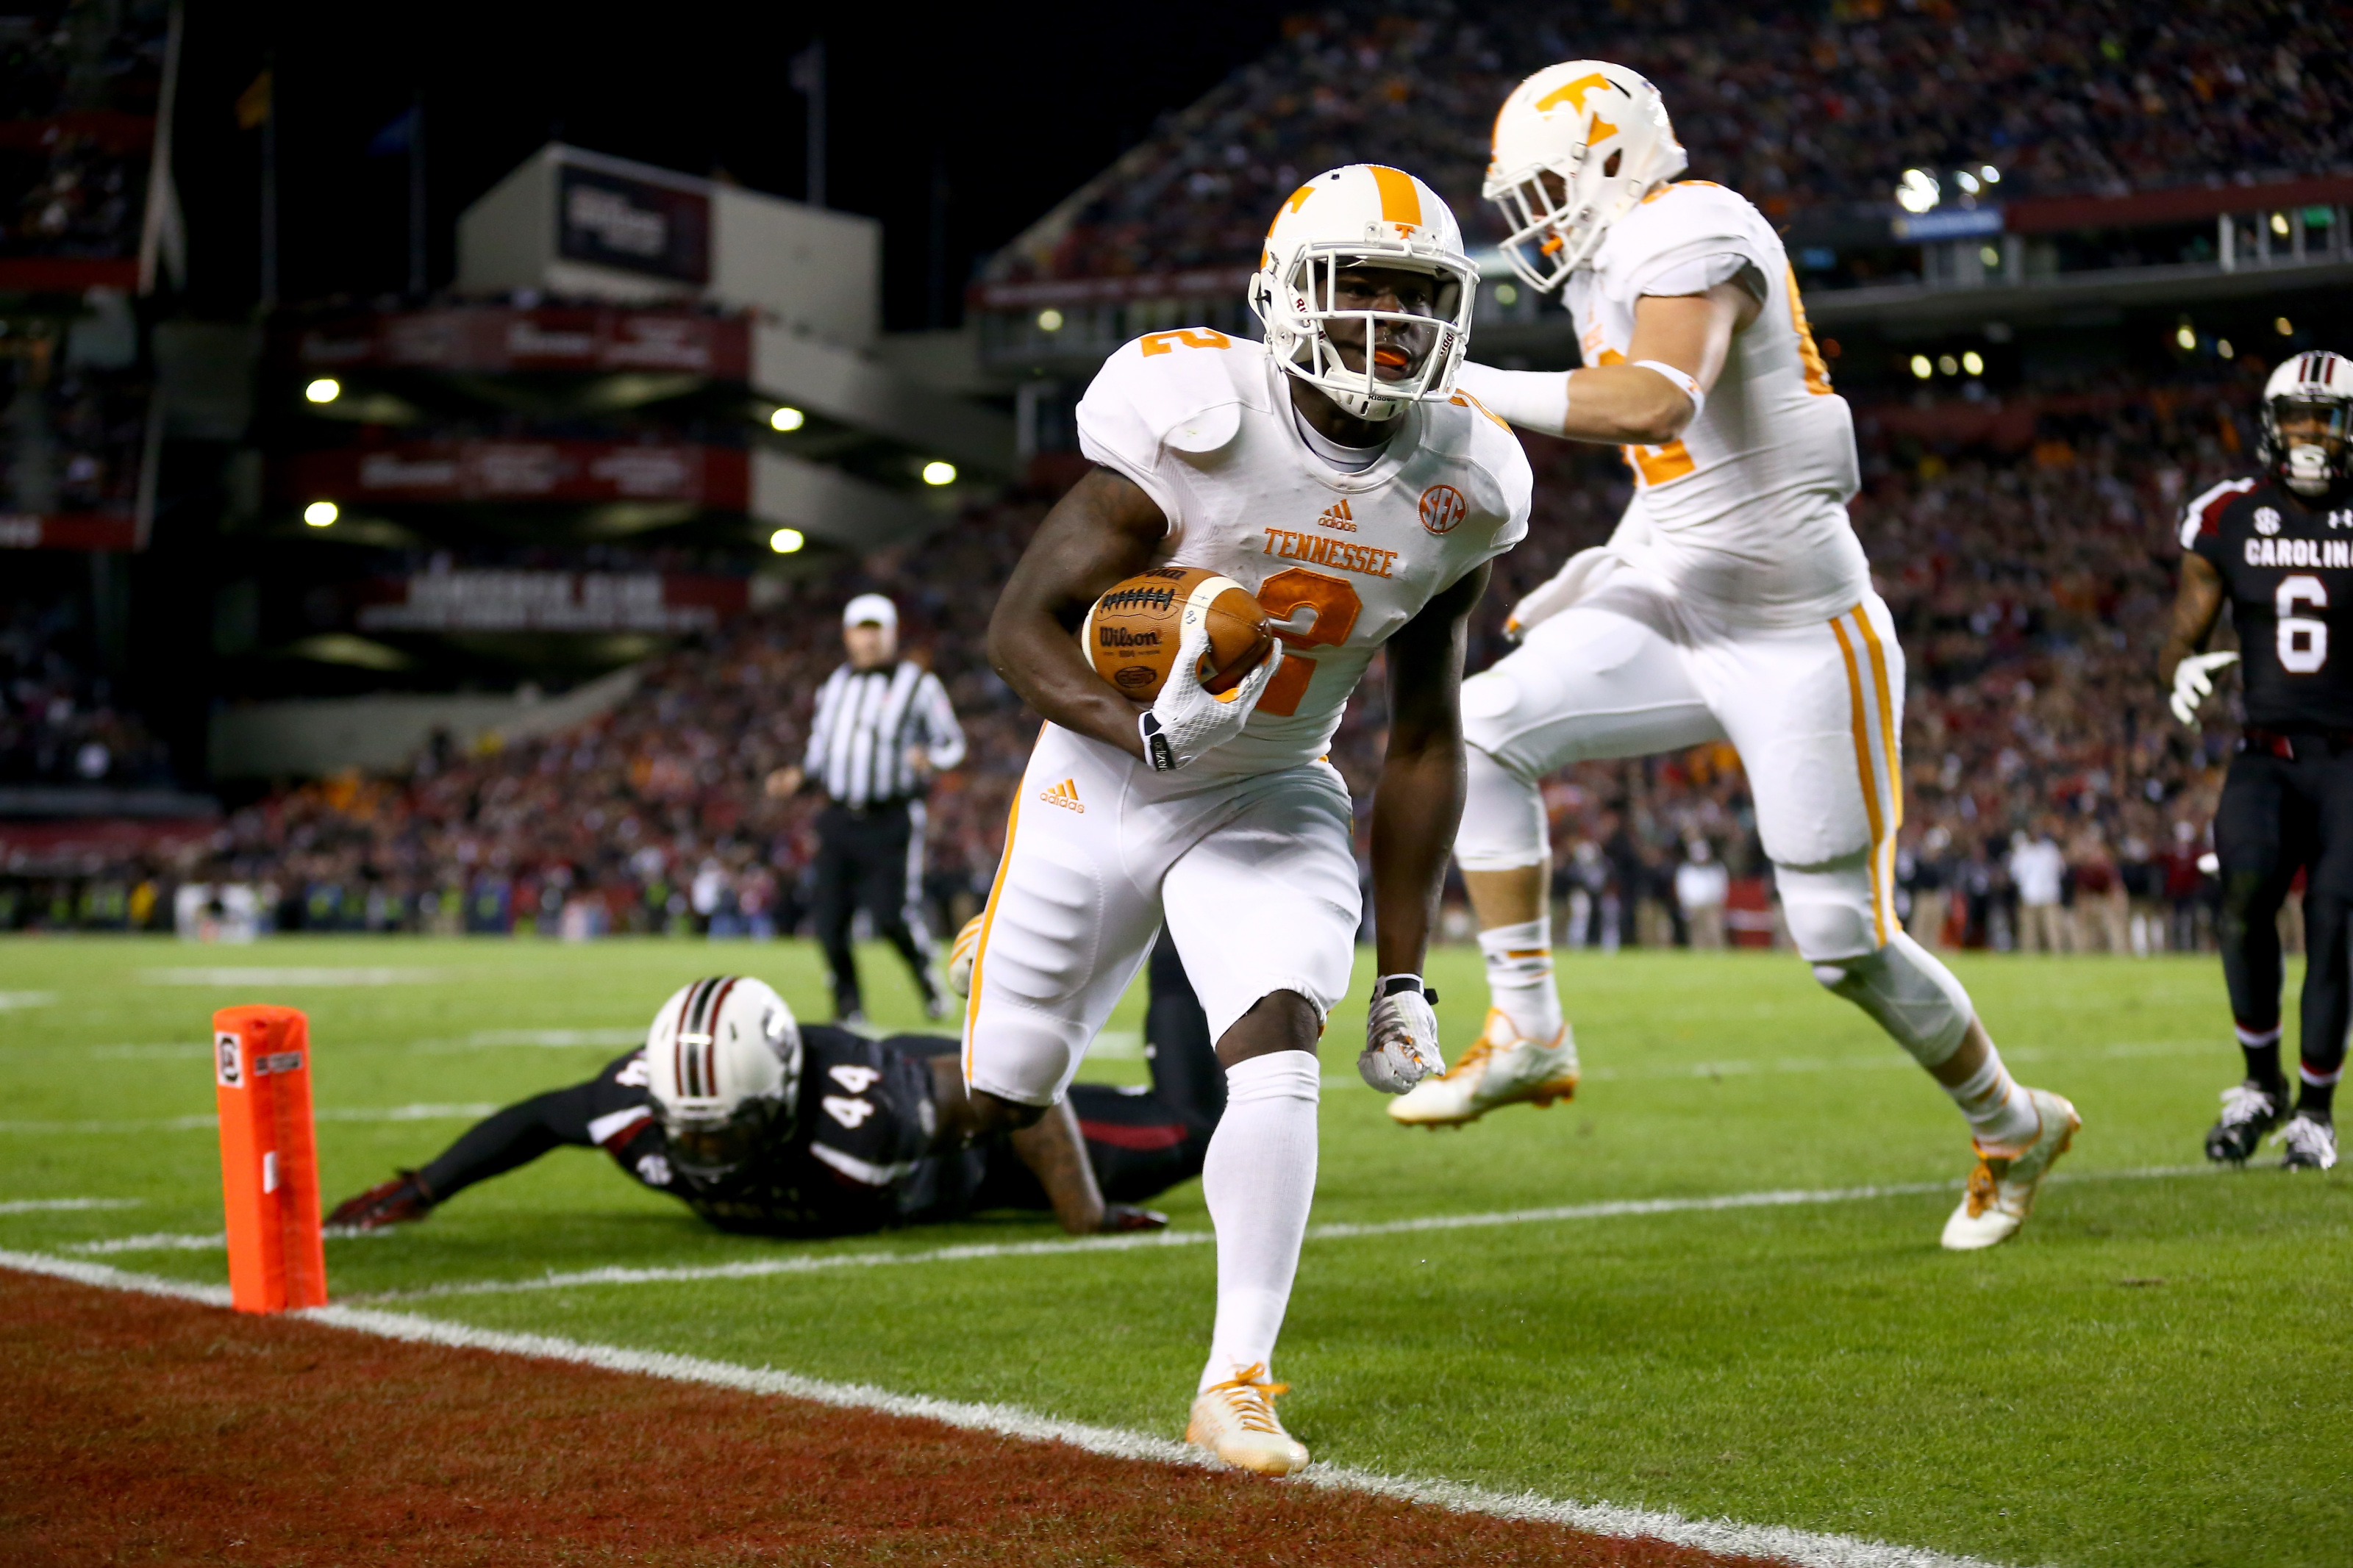 NFL Draft Day Arrives For Program-Changing Tennessee VFLs - University of  Tennessee Athletics